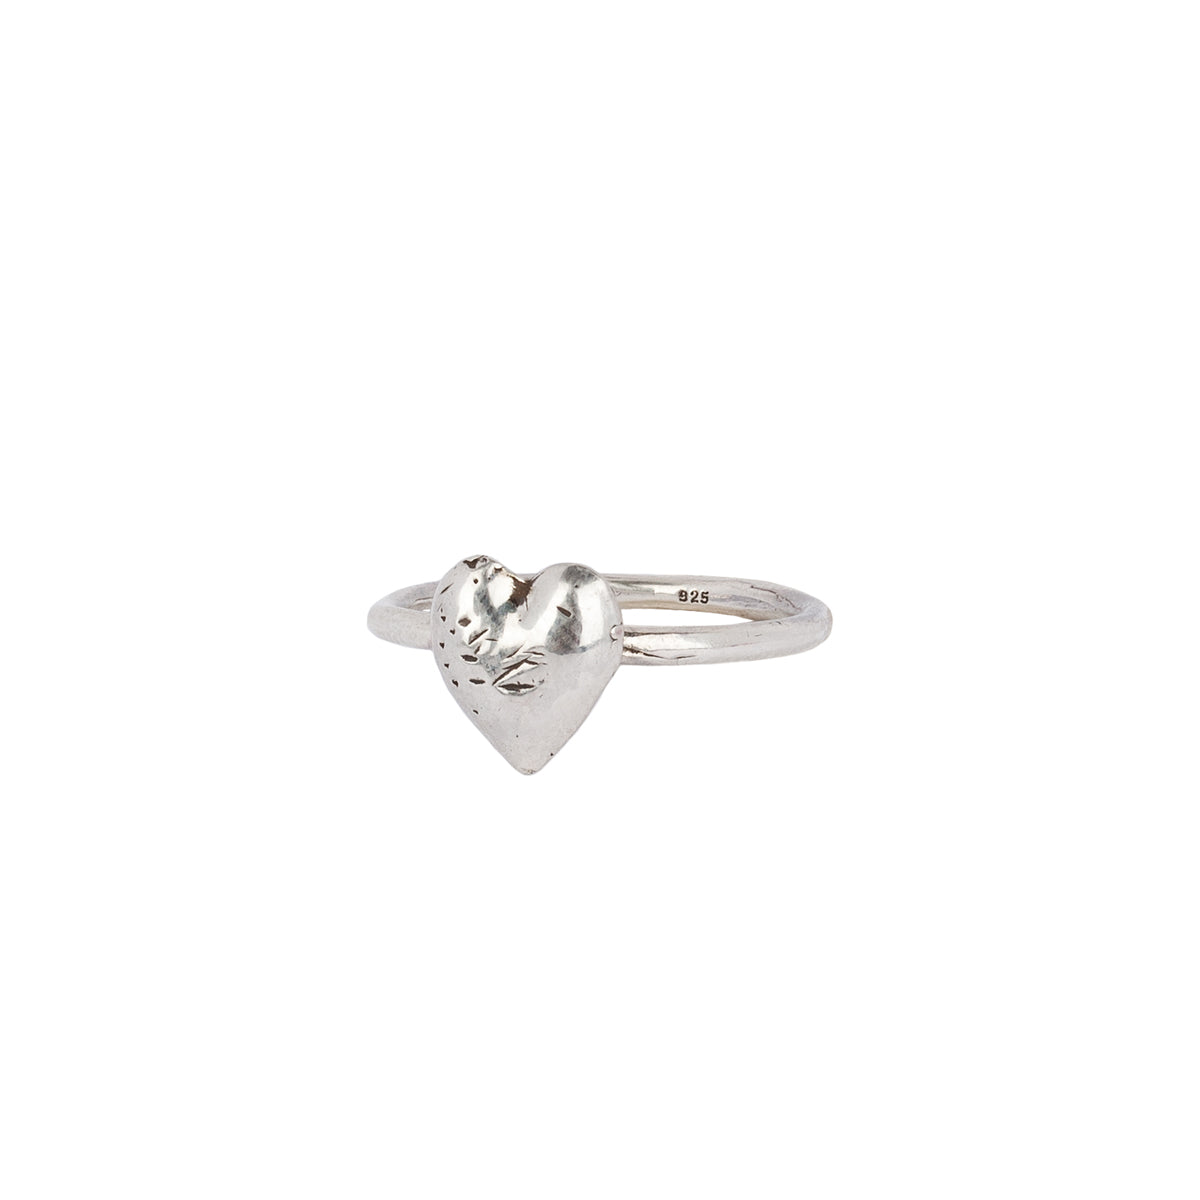 A silver ring with our Heart symbol charm.